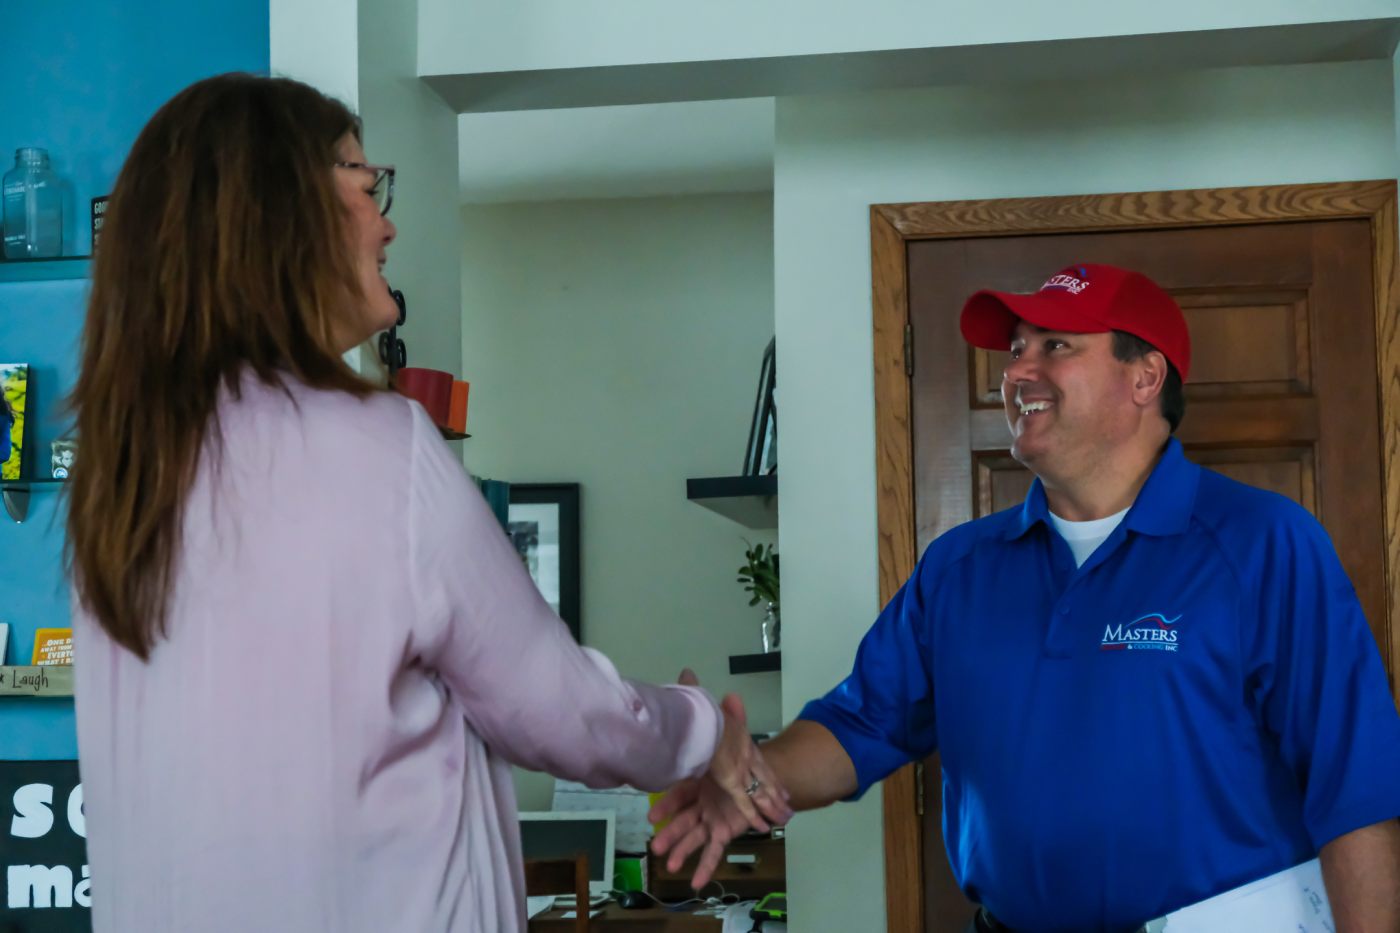 Masters Heating & Cooling technician shaking the hand of an Indiana homeowner